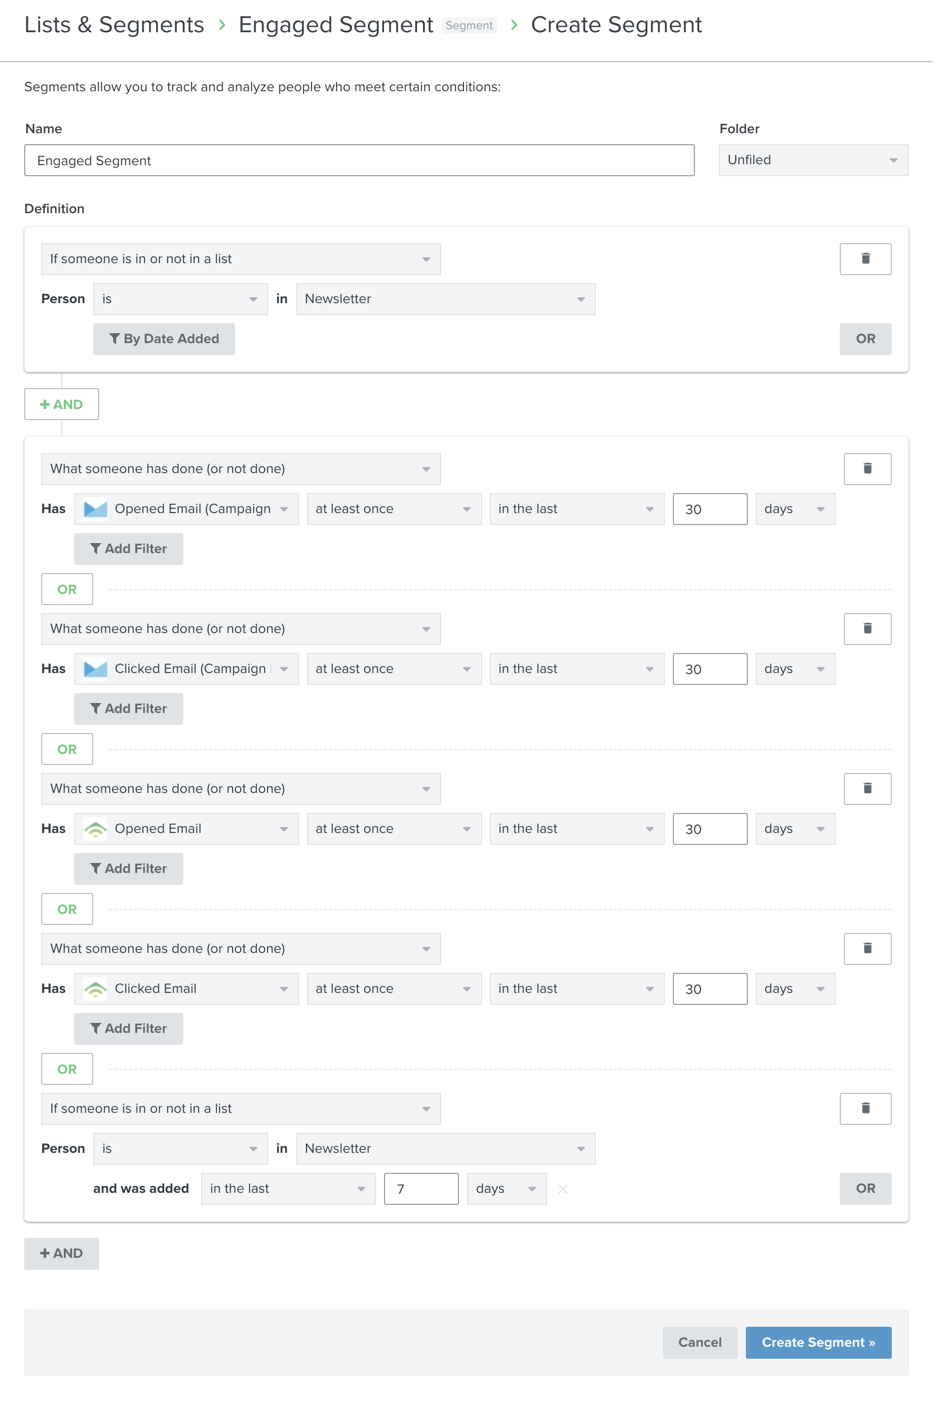 Build engaged segments for migrated Campaign Monitor content